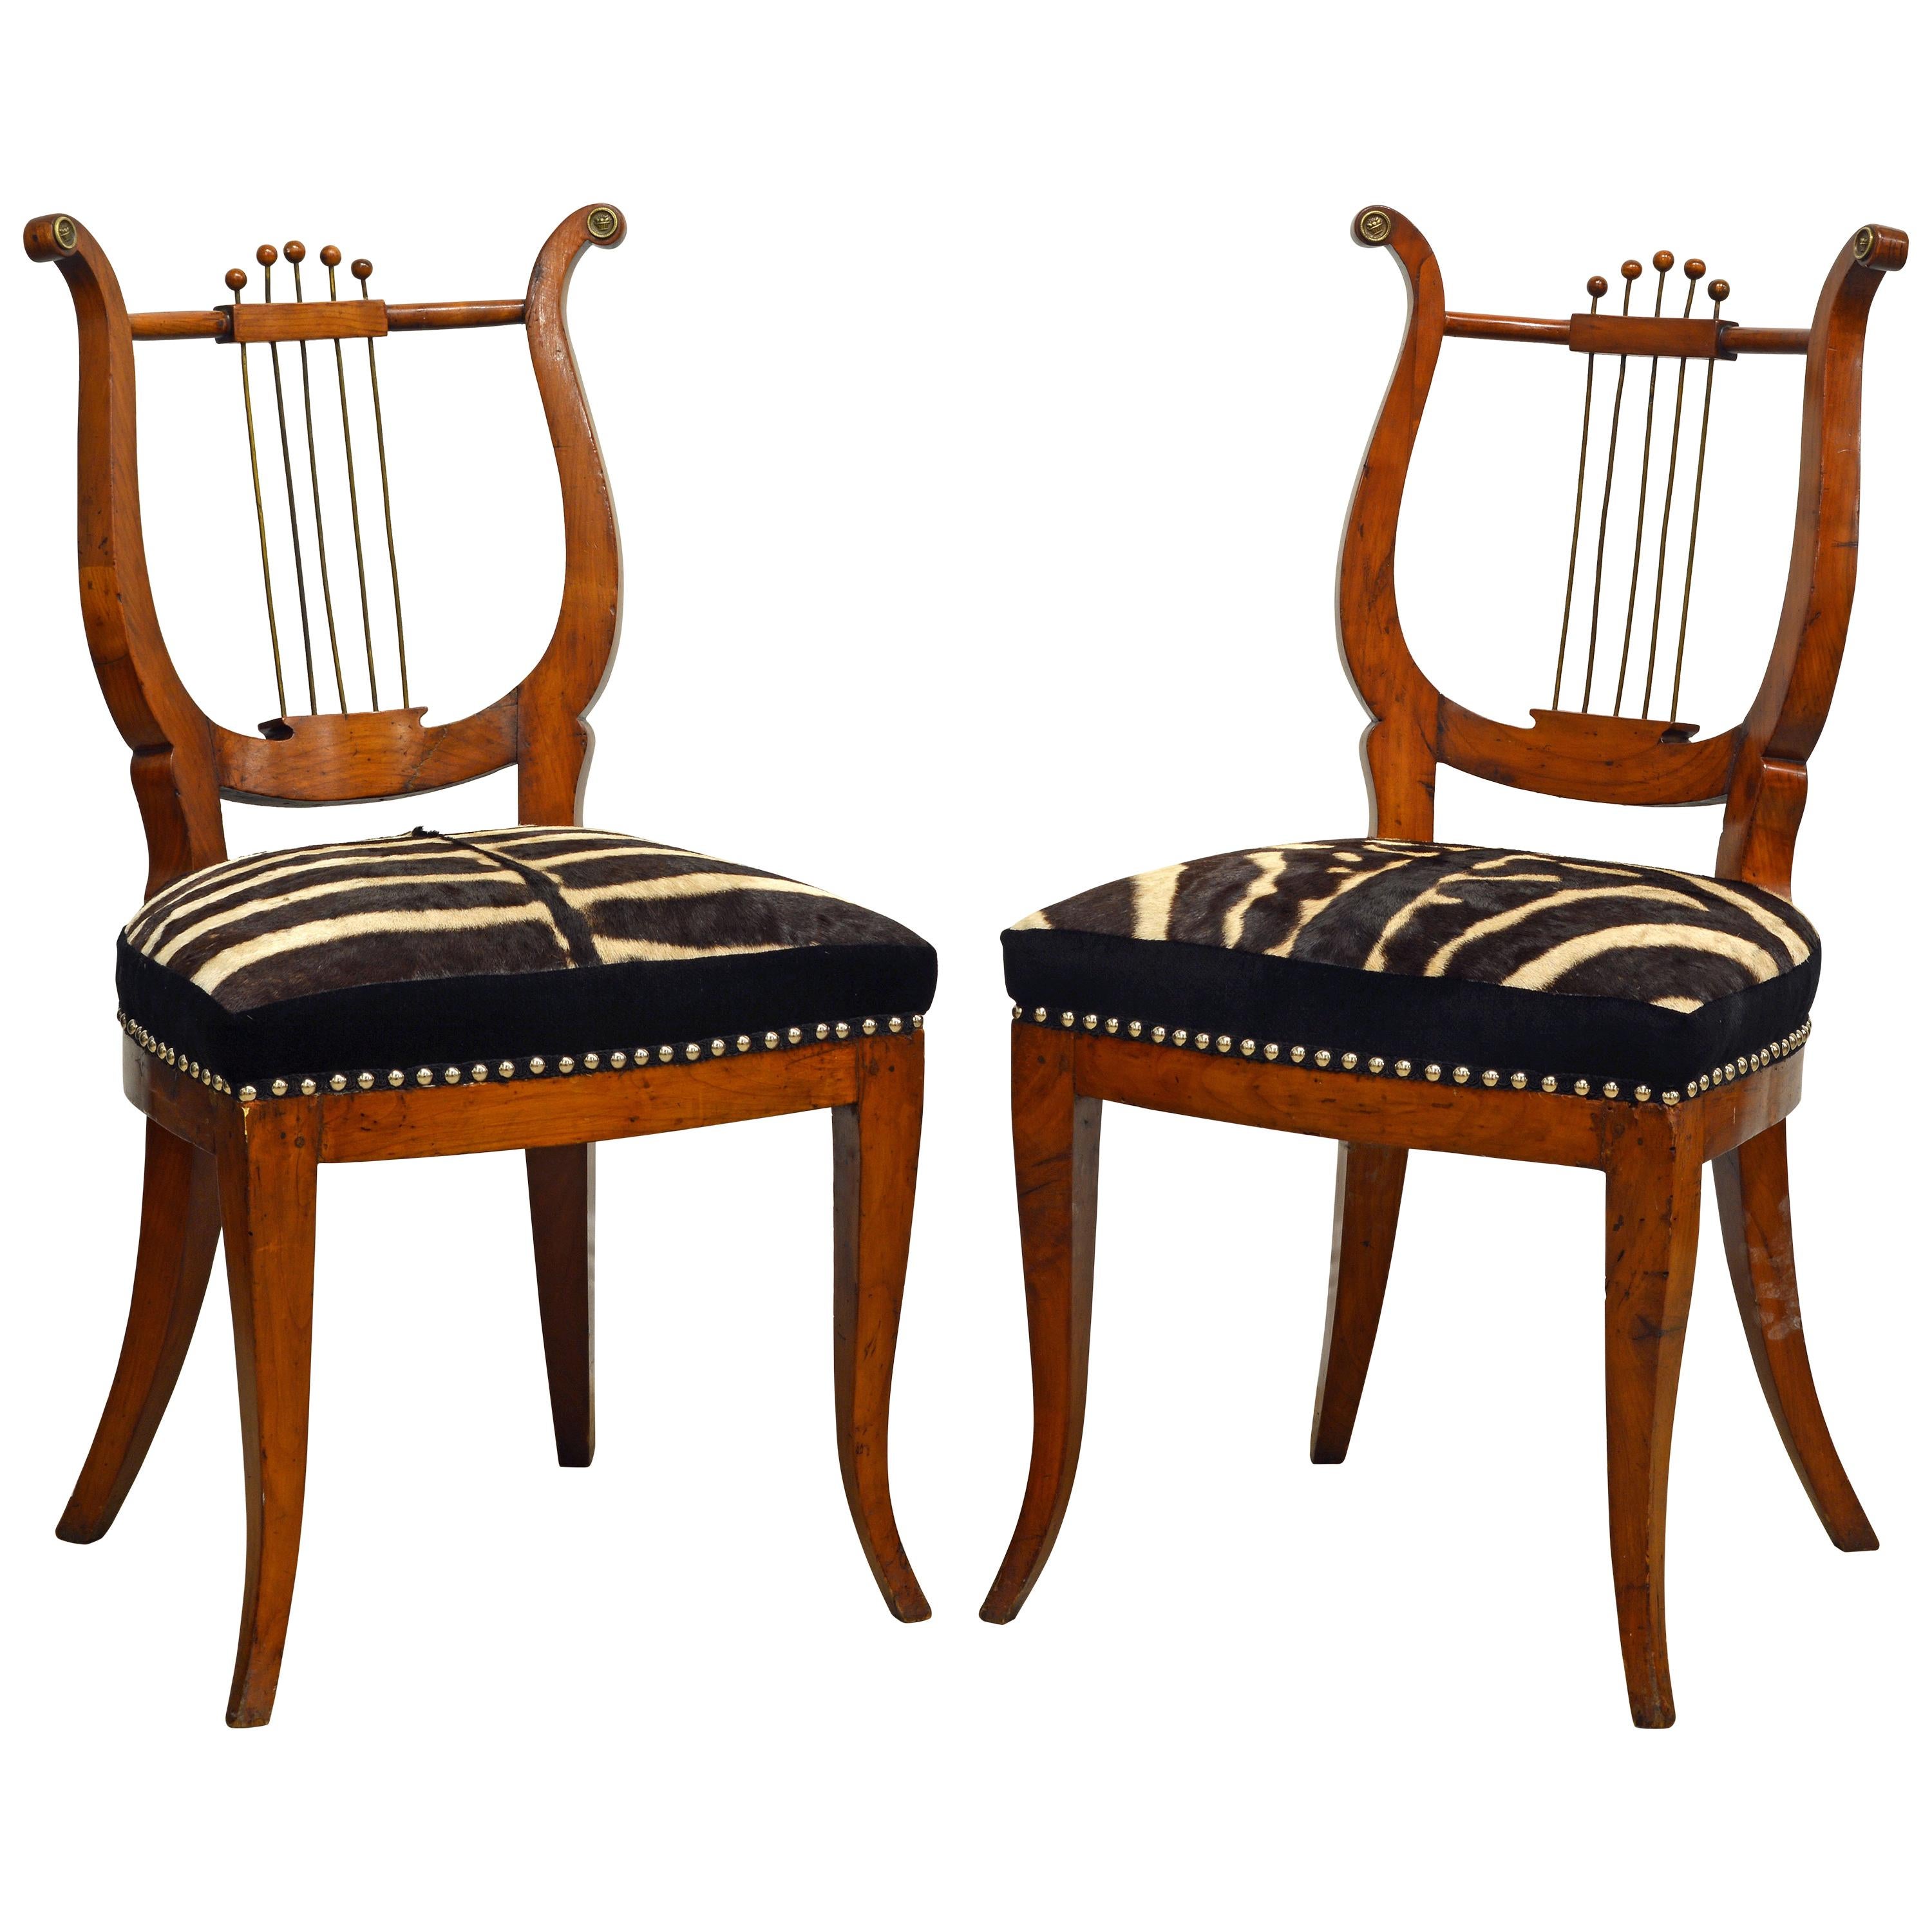 Pair of 19th Century Austrian Neoclassical Zebra Covered Lyre Back Salon Chairs